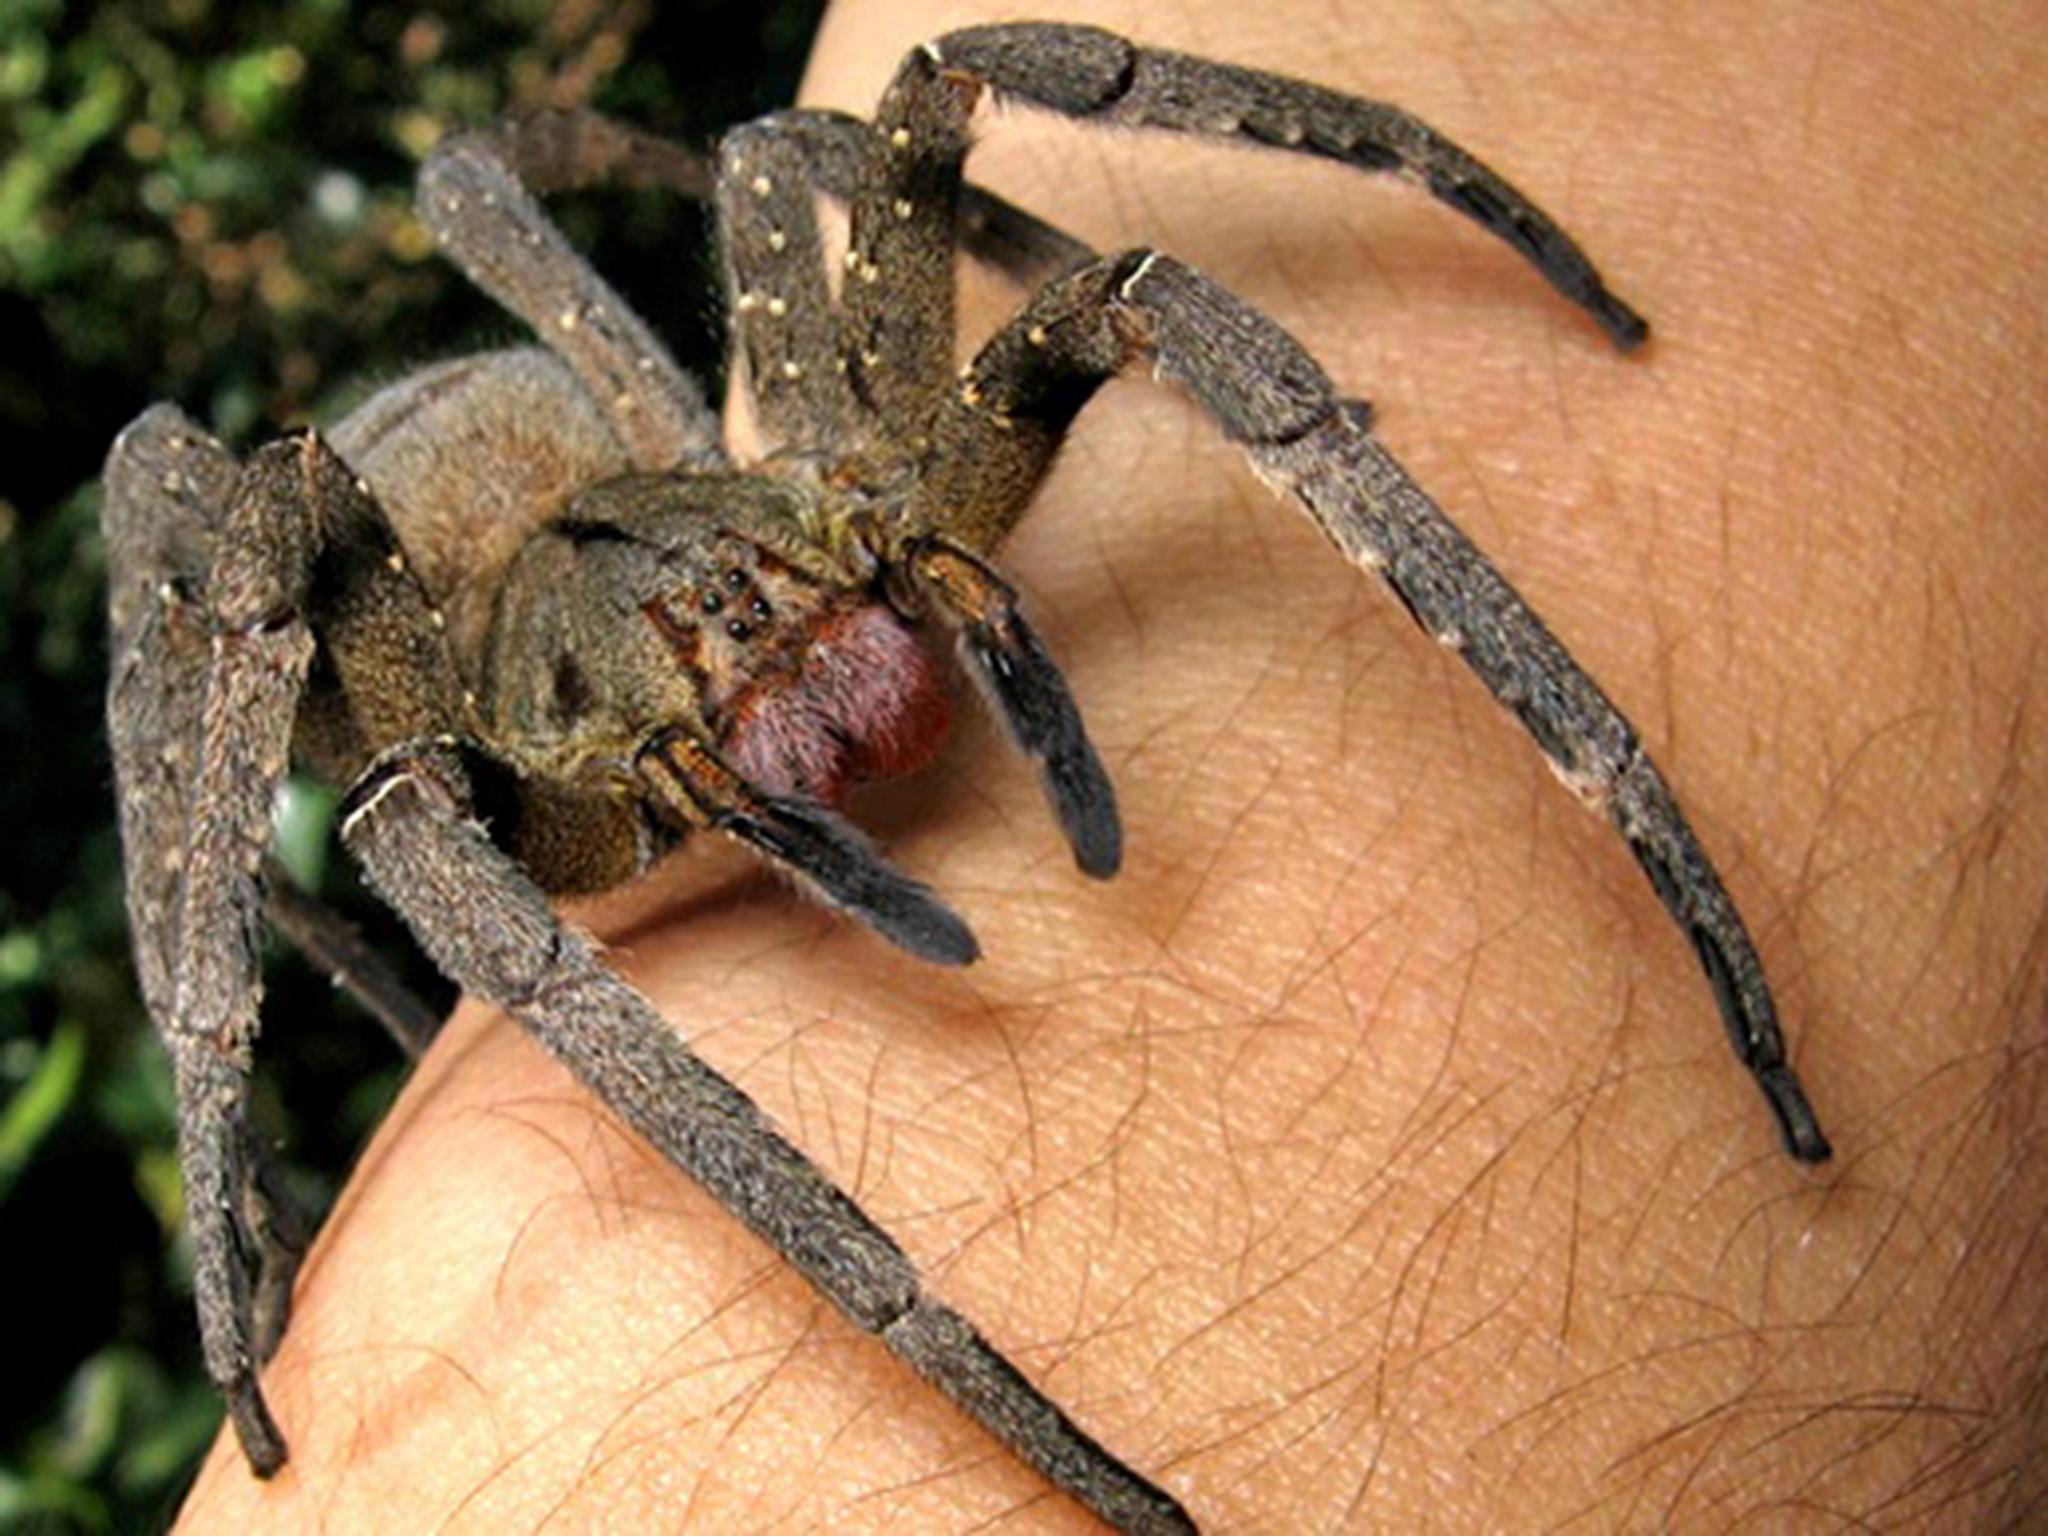 There have been reports the insects were Brazilian wandering spiders